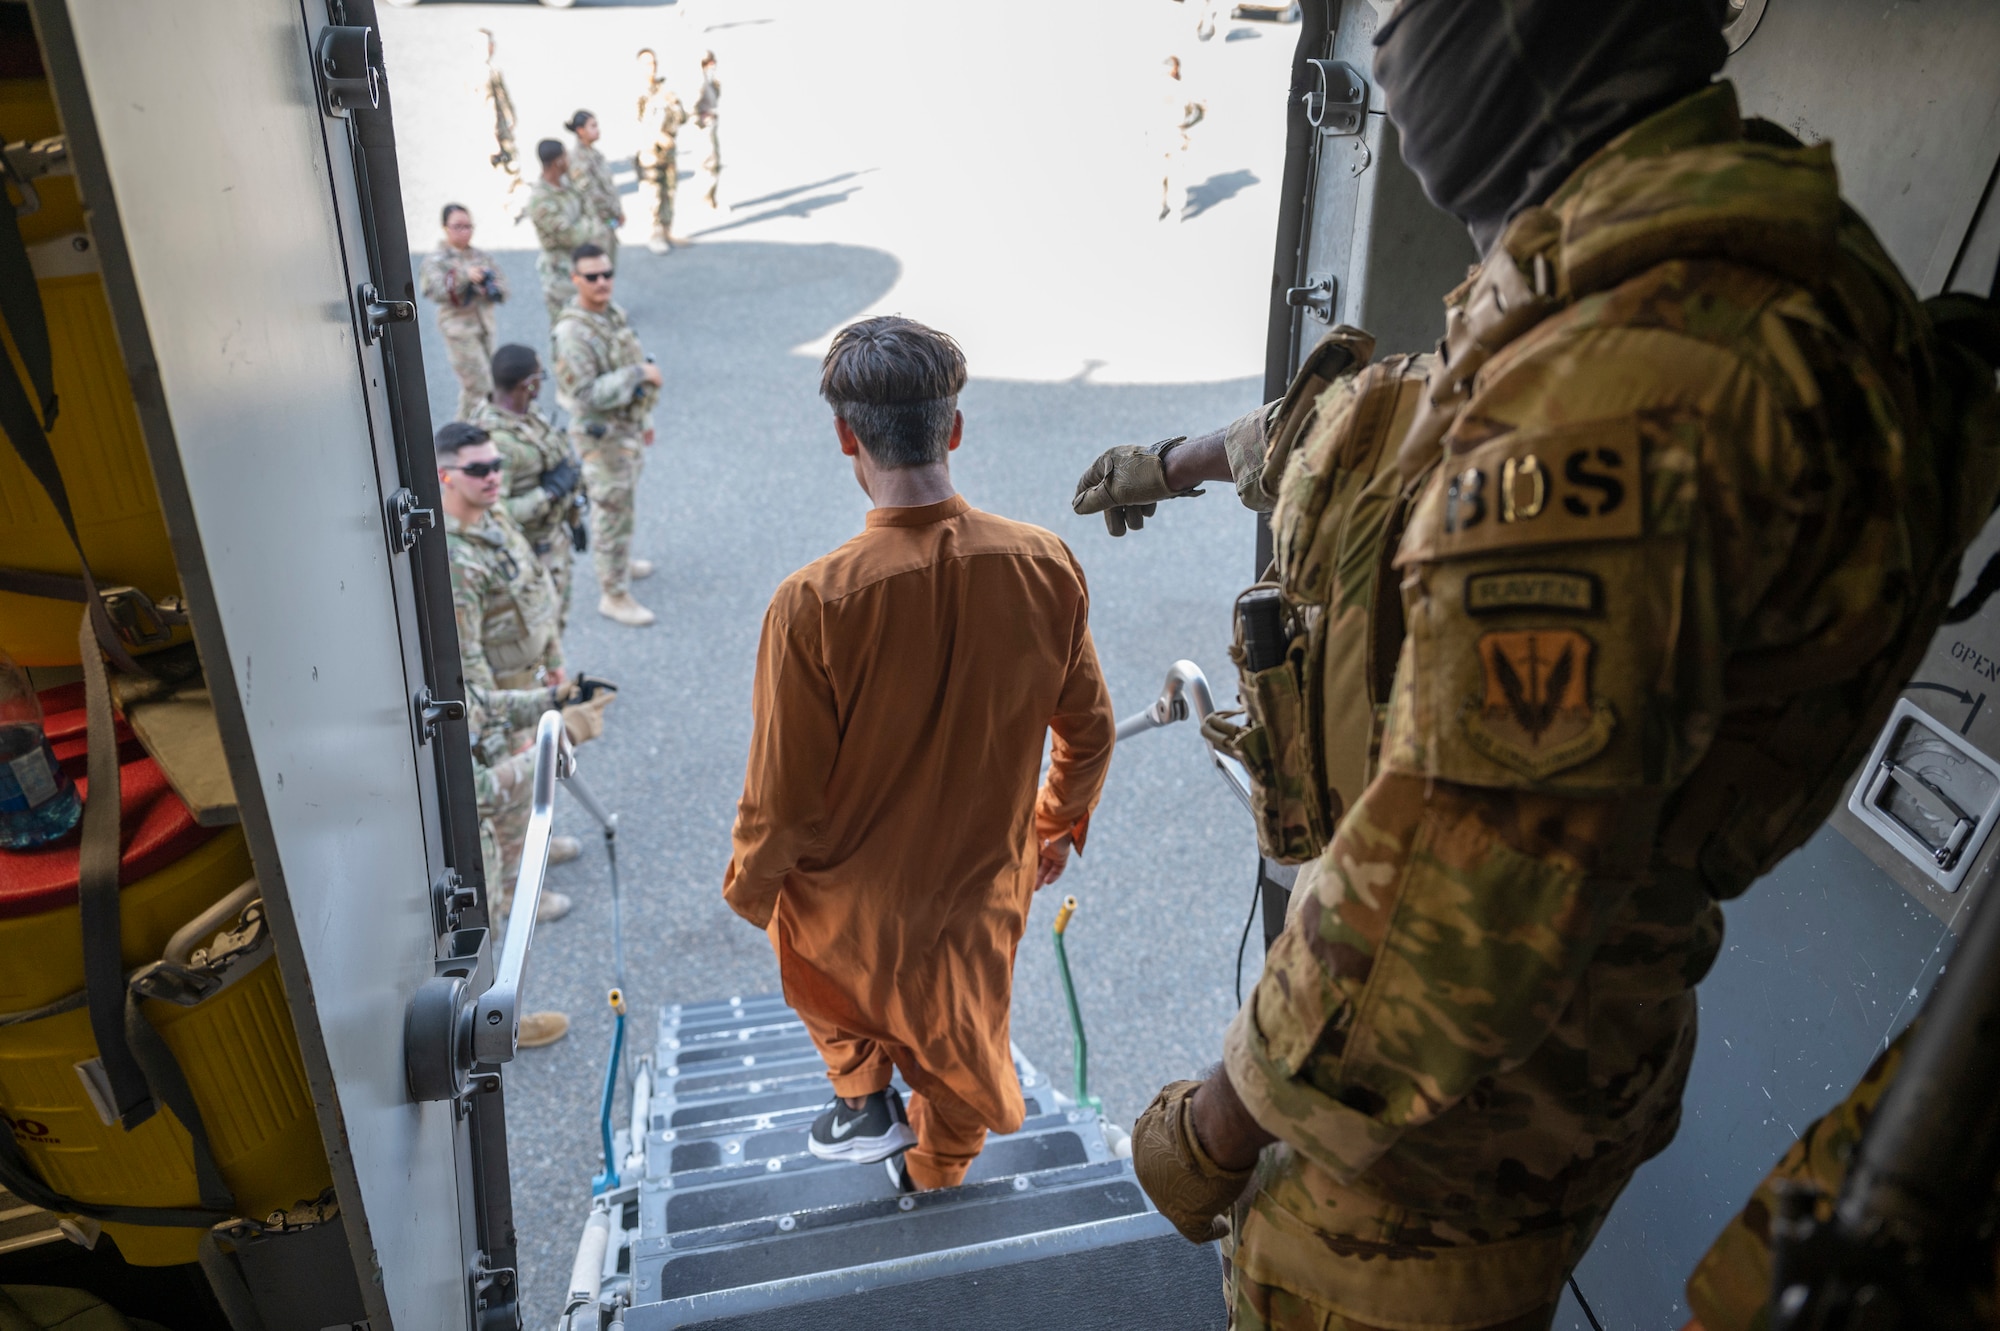 Evacuees arrive on a C-17 Globemaster III aircraft at Ali Al Salem Air Base, Kuwait, August 23, 2021. U.S. Air Force Airmen are assisting with evacuations of Americans and allied civilian personnel from Afghanistan.